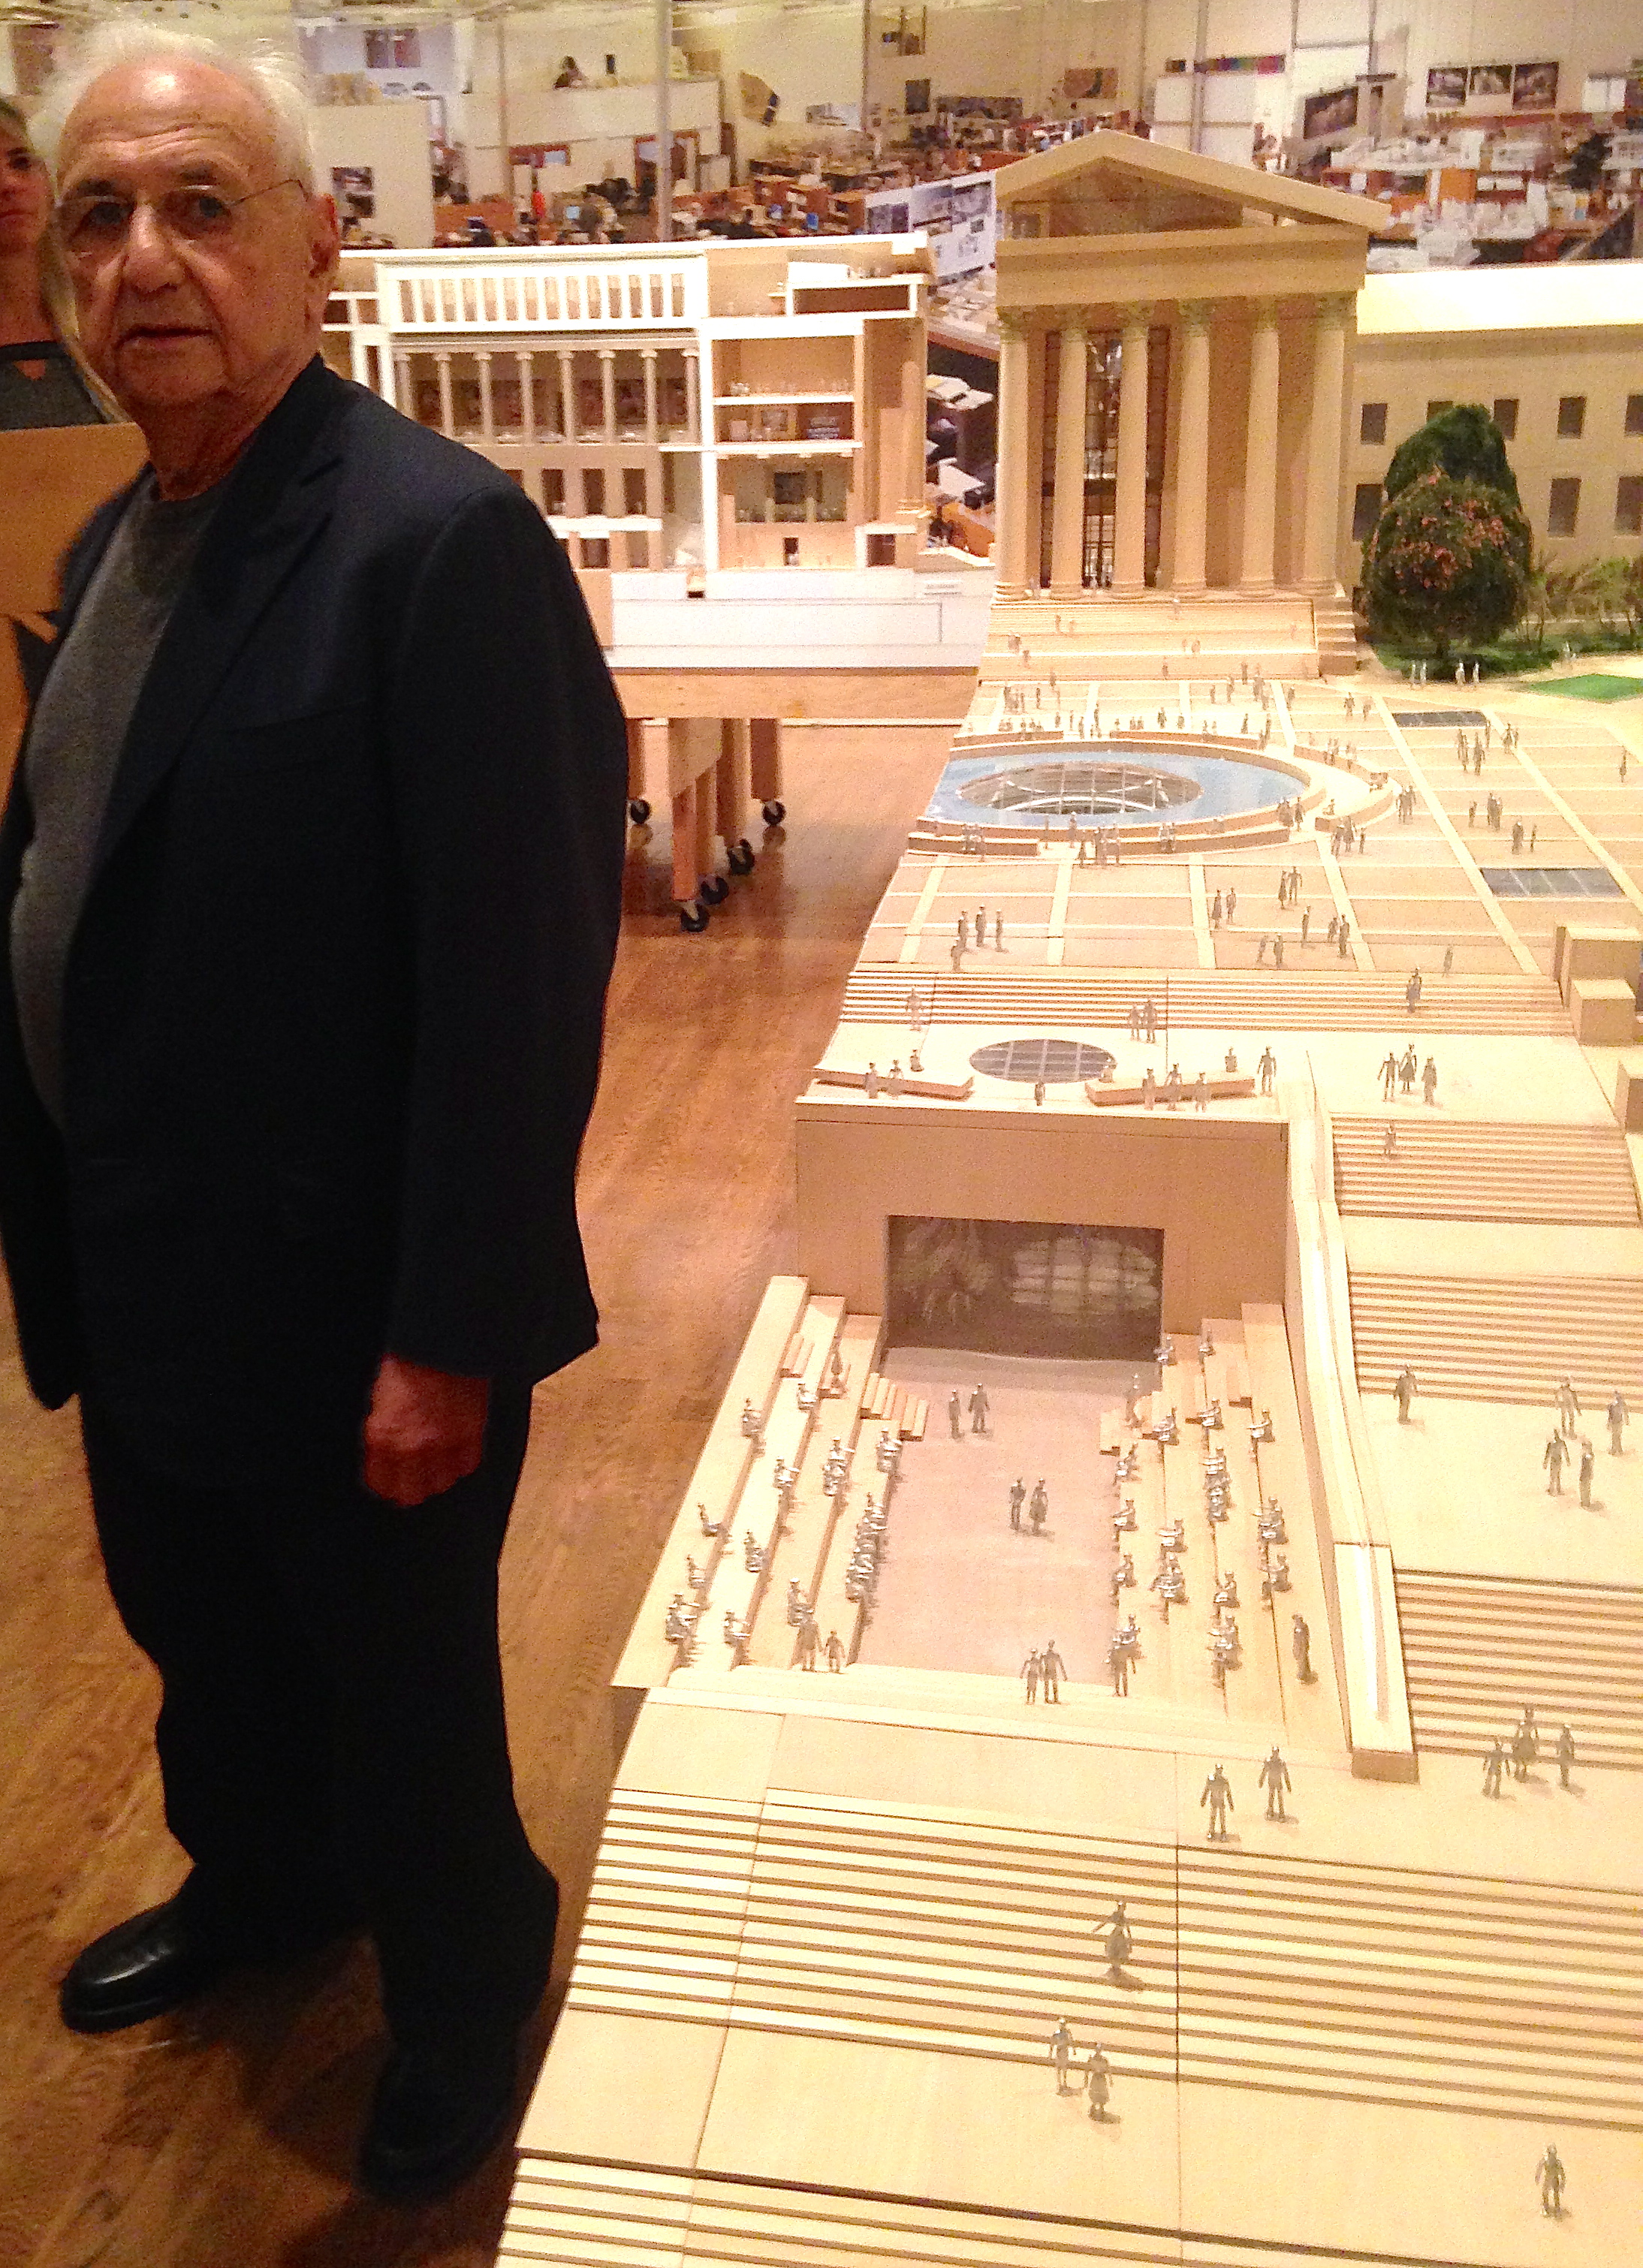 Frank Gerhy with a model of his planned adaptations of the Philadelphia Museum of Art, June 2014